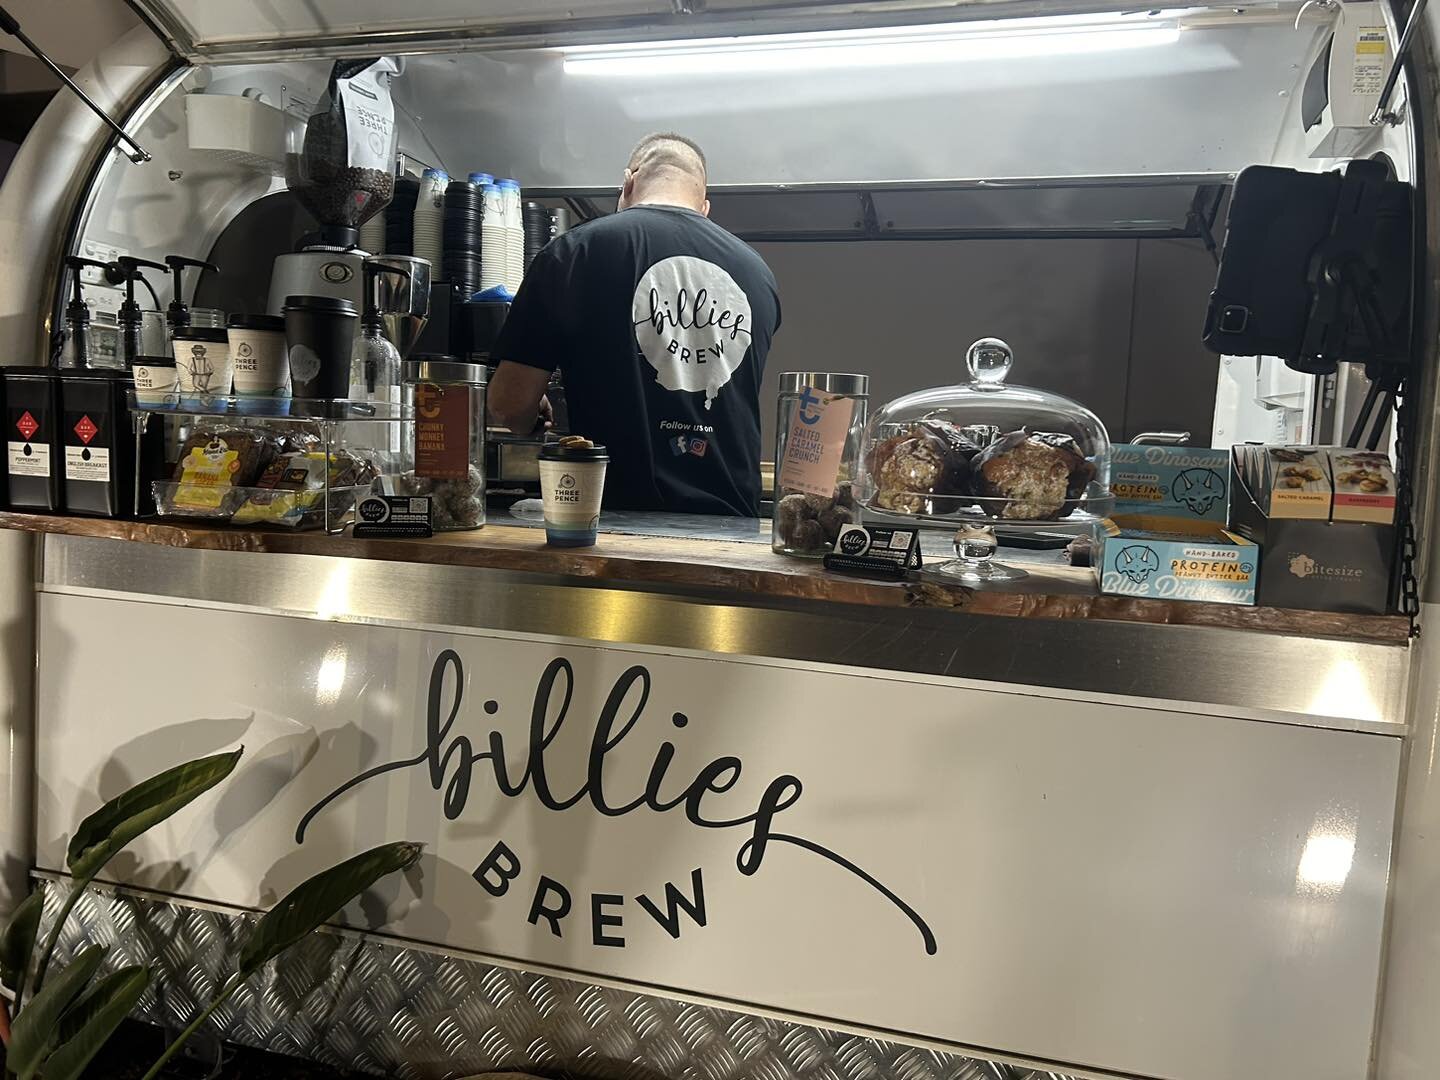 Looking for your coffee fix this Good Friday. Pop in and see Johnny the legend Billies Brew. Open until 12pm. Just the pick me up we needed for work this morning whilst everyone else is tucked up in bed.
Thanks Johnny always a pleasure mate.
#support